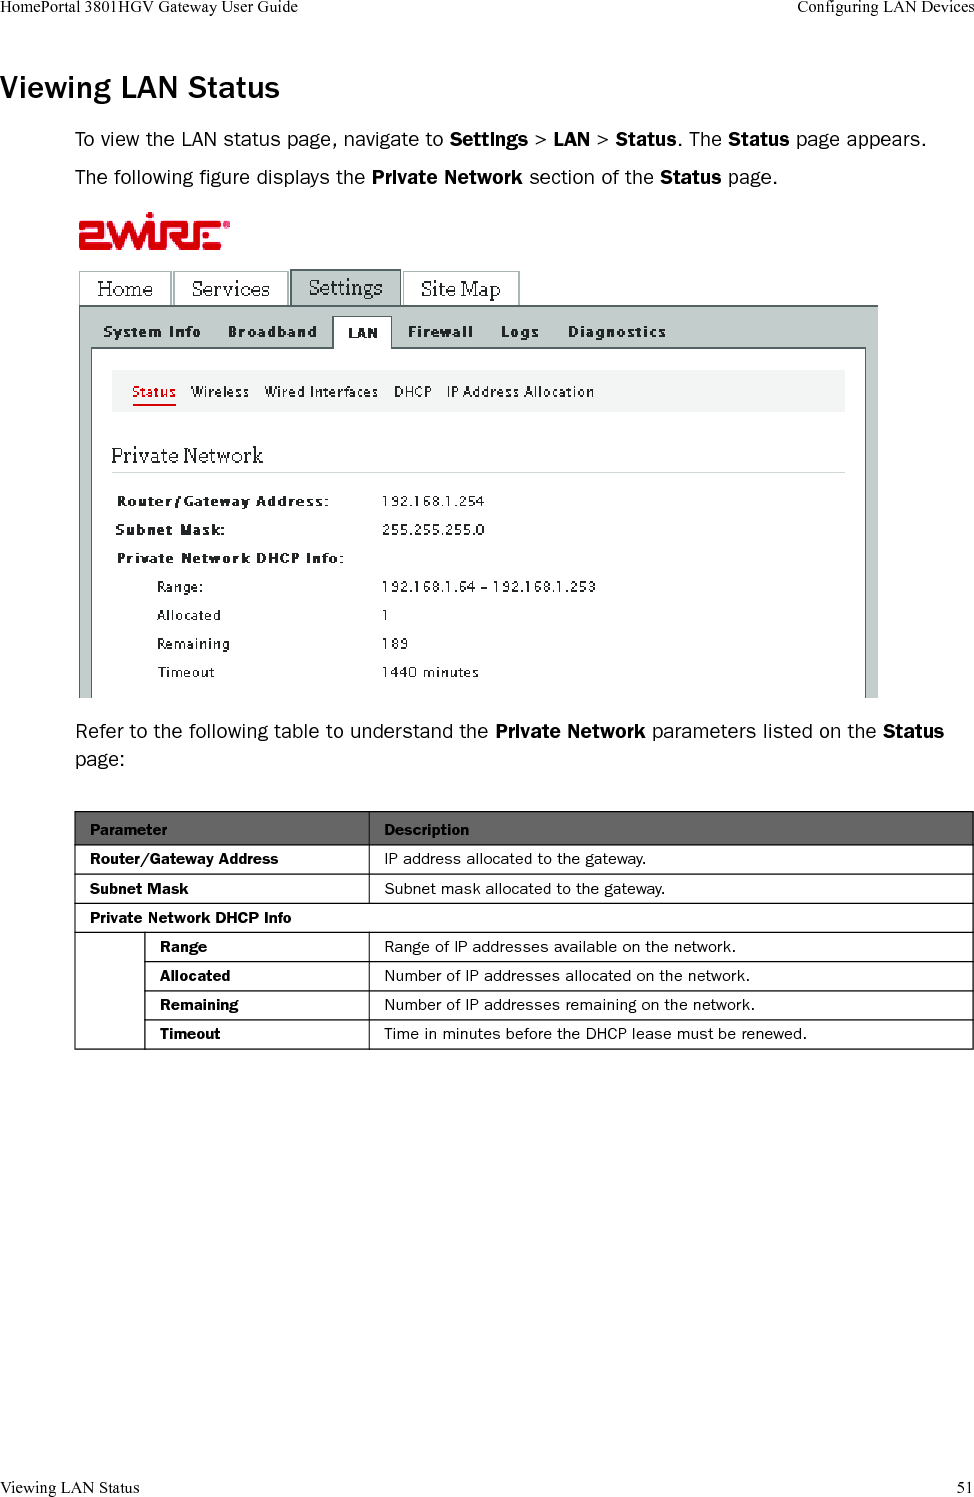 Viewing LAN Status 51HomePortal 3801HGV Gateway User Guide Configuring LAN DevicesViewing LAN StatusTo view the LAN status page, navigate to Settings &gt; LAN &gt; Status. The Status page appears.The following figure displays the Private Network section of the Status page.Refer to the following table to understand the Private Network parameters listed on the Status page:Parameter DescriptionRouter/Gateway Address IP address allocated to the gateway.Subnet Mask Subnet mask allocated to the gateway.Private Network DHCP InfoRange Range of IP addresses available on the network.Allocated Number of IP addresses allocated on the network.Remaining Number of IP addresses remaining on the network.Timeout Time in minutes before the DHCP lease must be renewed.